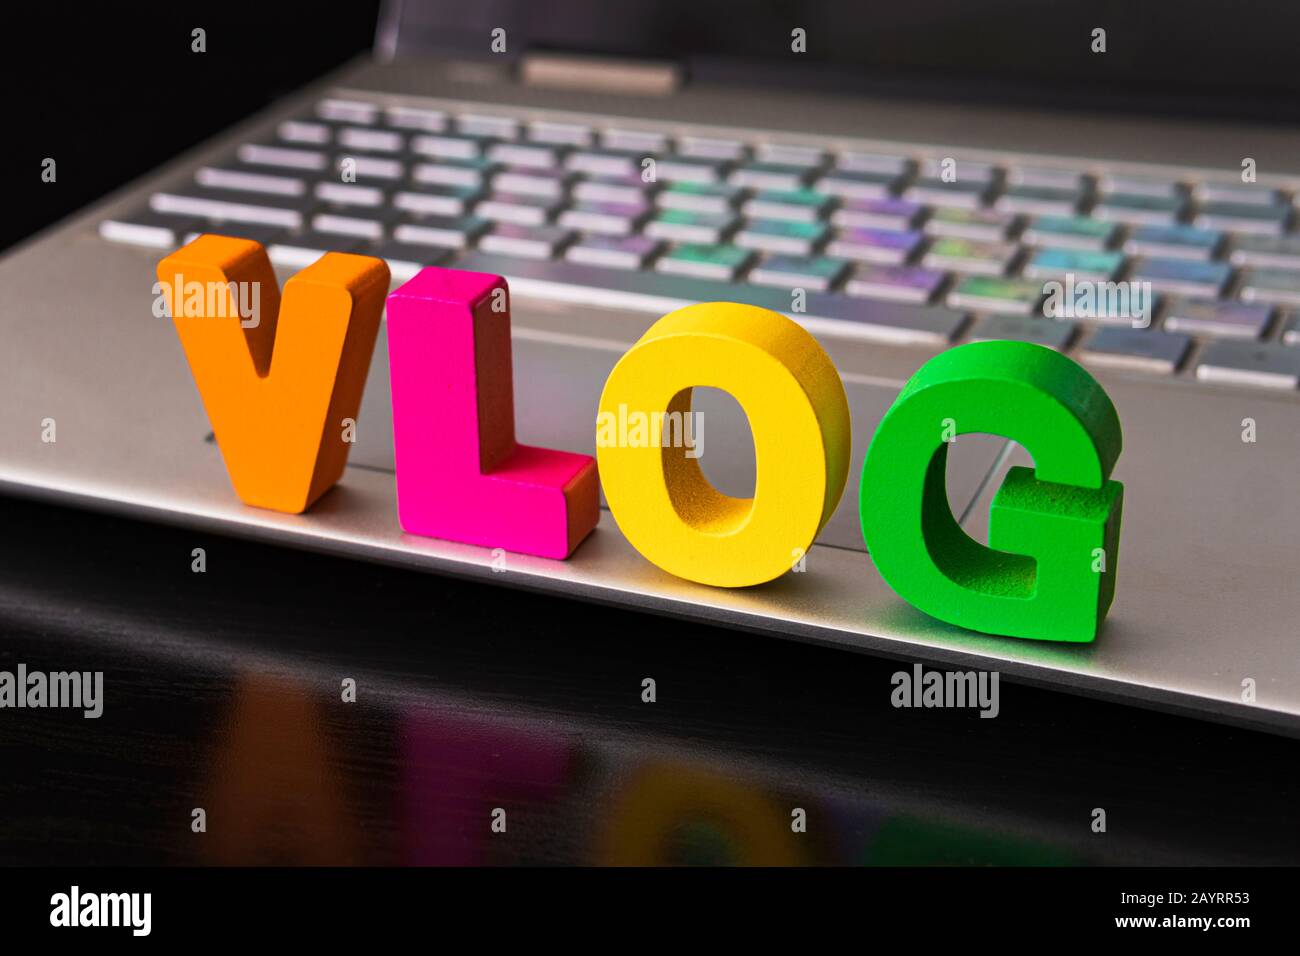 https://c8.alamy.com/comp/2AYRR53/vlog-or-video-blog-concept-with-vlog-word-from-funny-letters-on-the-background-computer-keyboard-2AYRR53.jpg